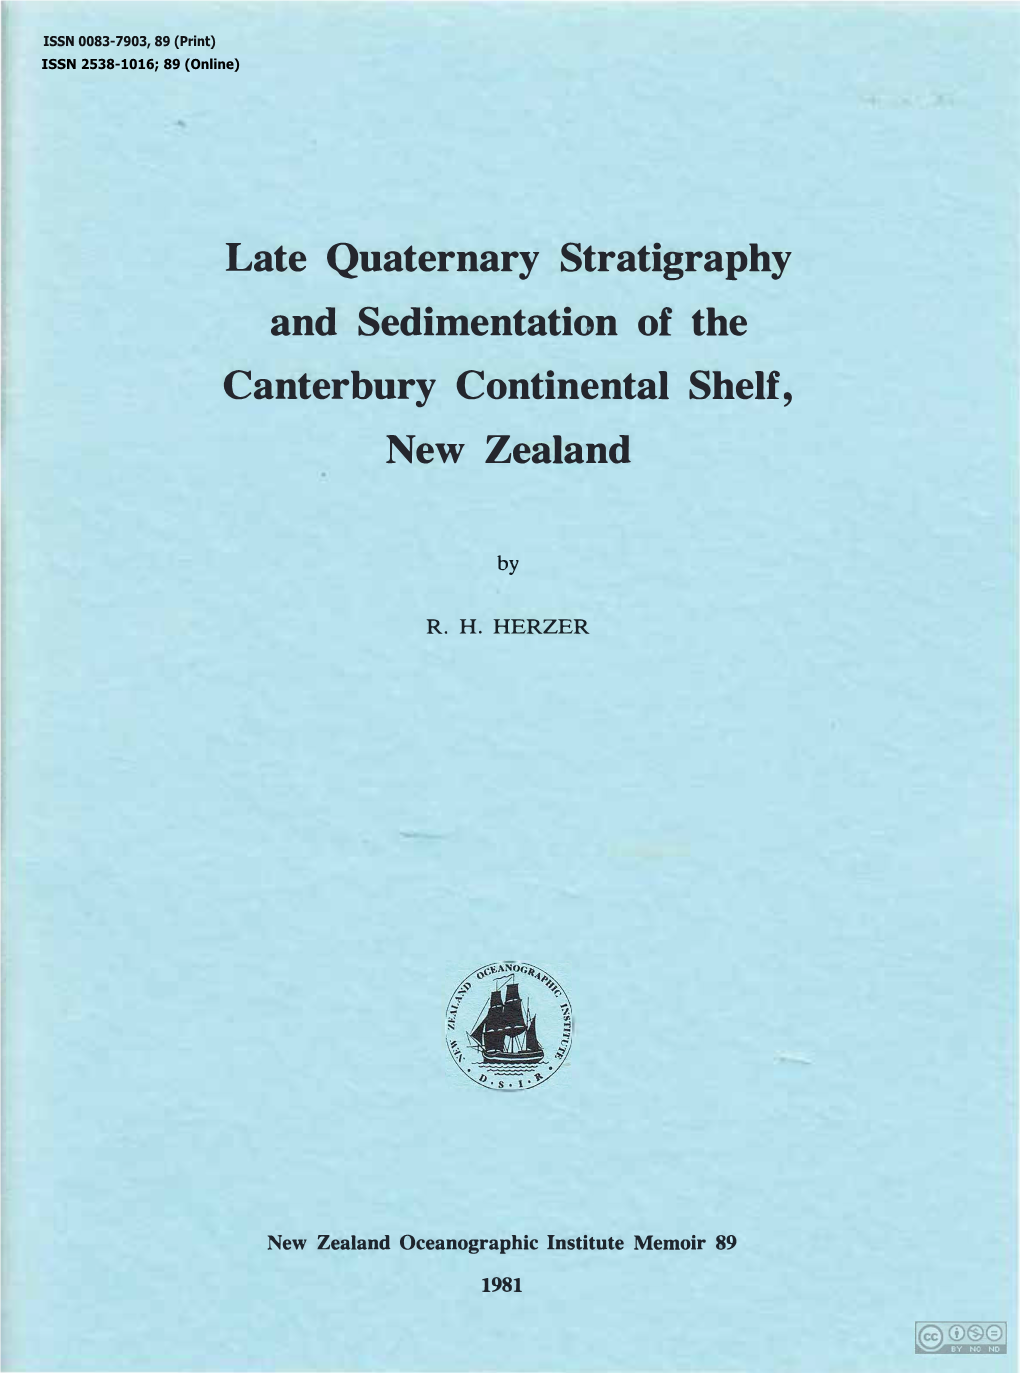 Late Quaternary Stratigraphy and Sedimentation of the Canterbury Continental Shelf, New Zealand